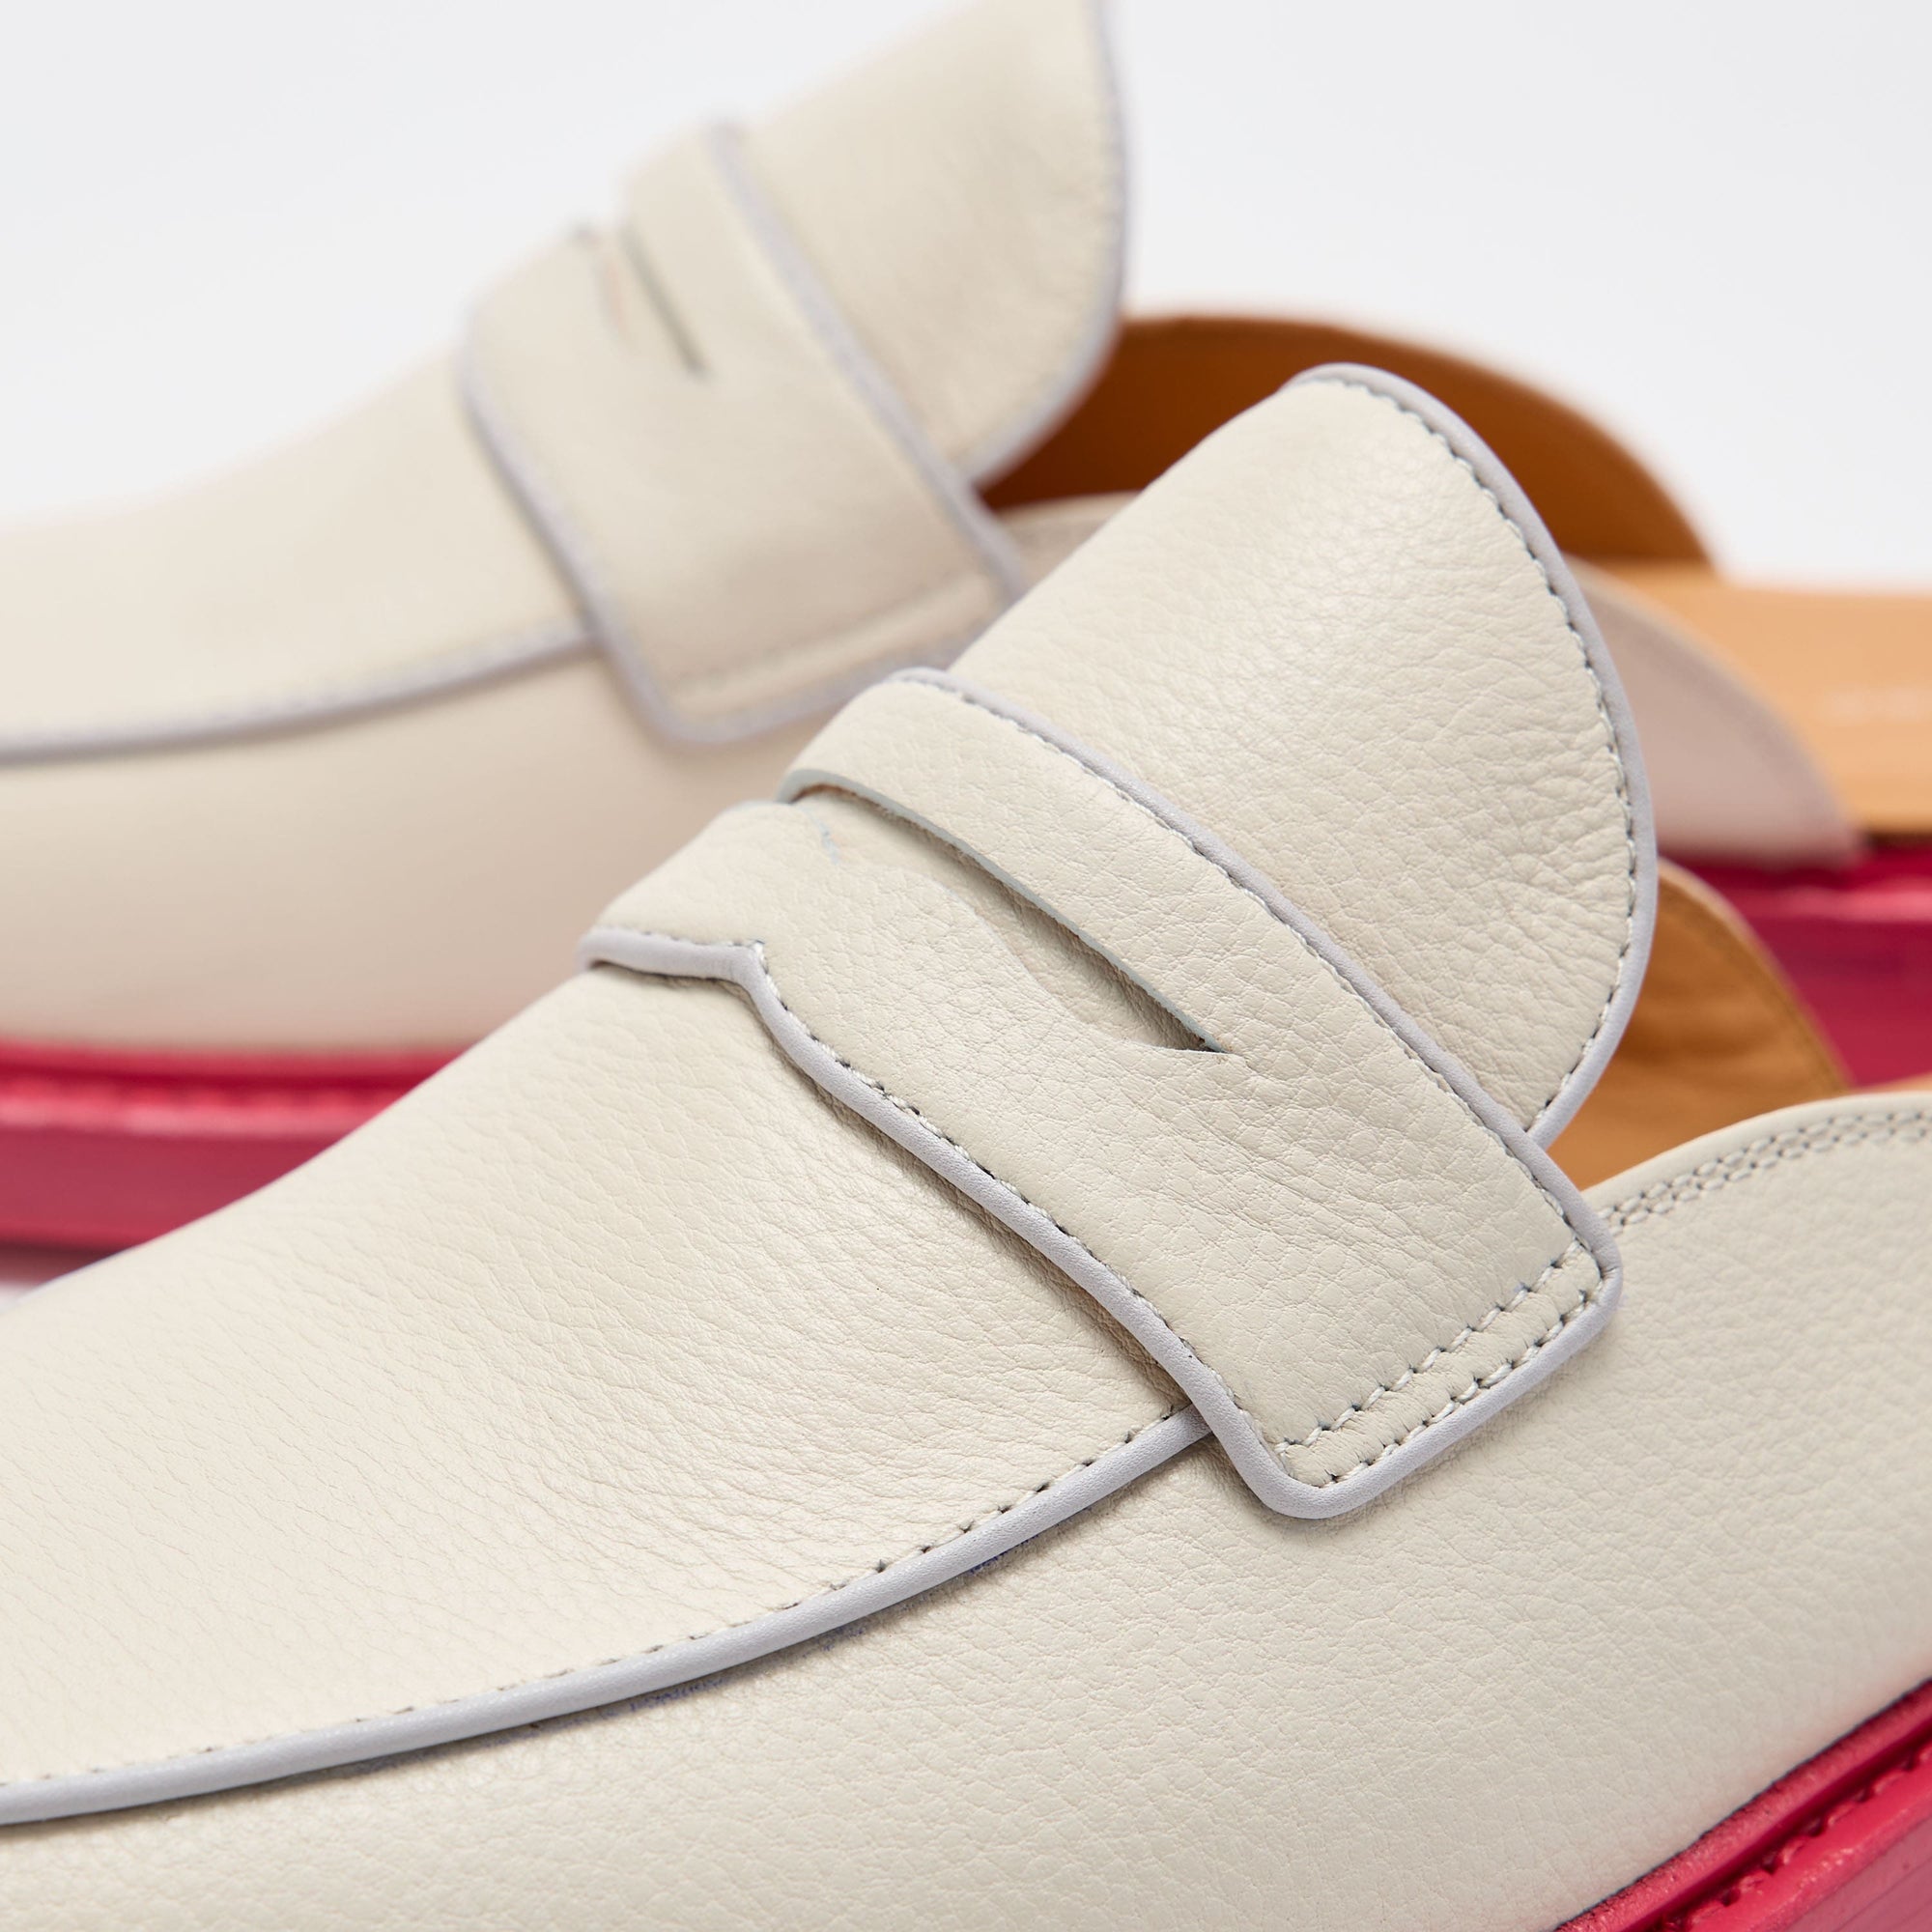 Del Mar Cream Pink Loafer Mules